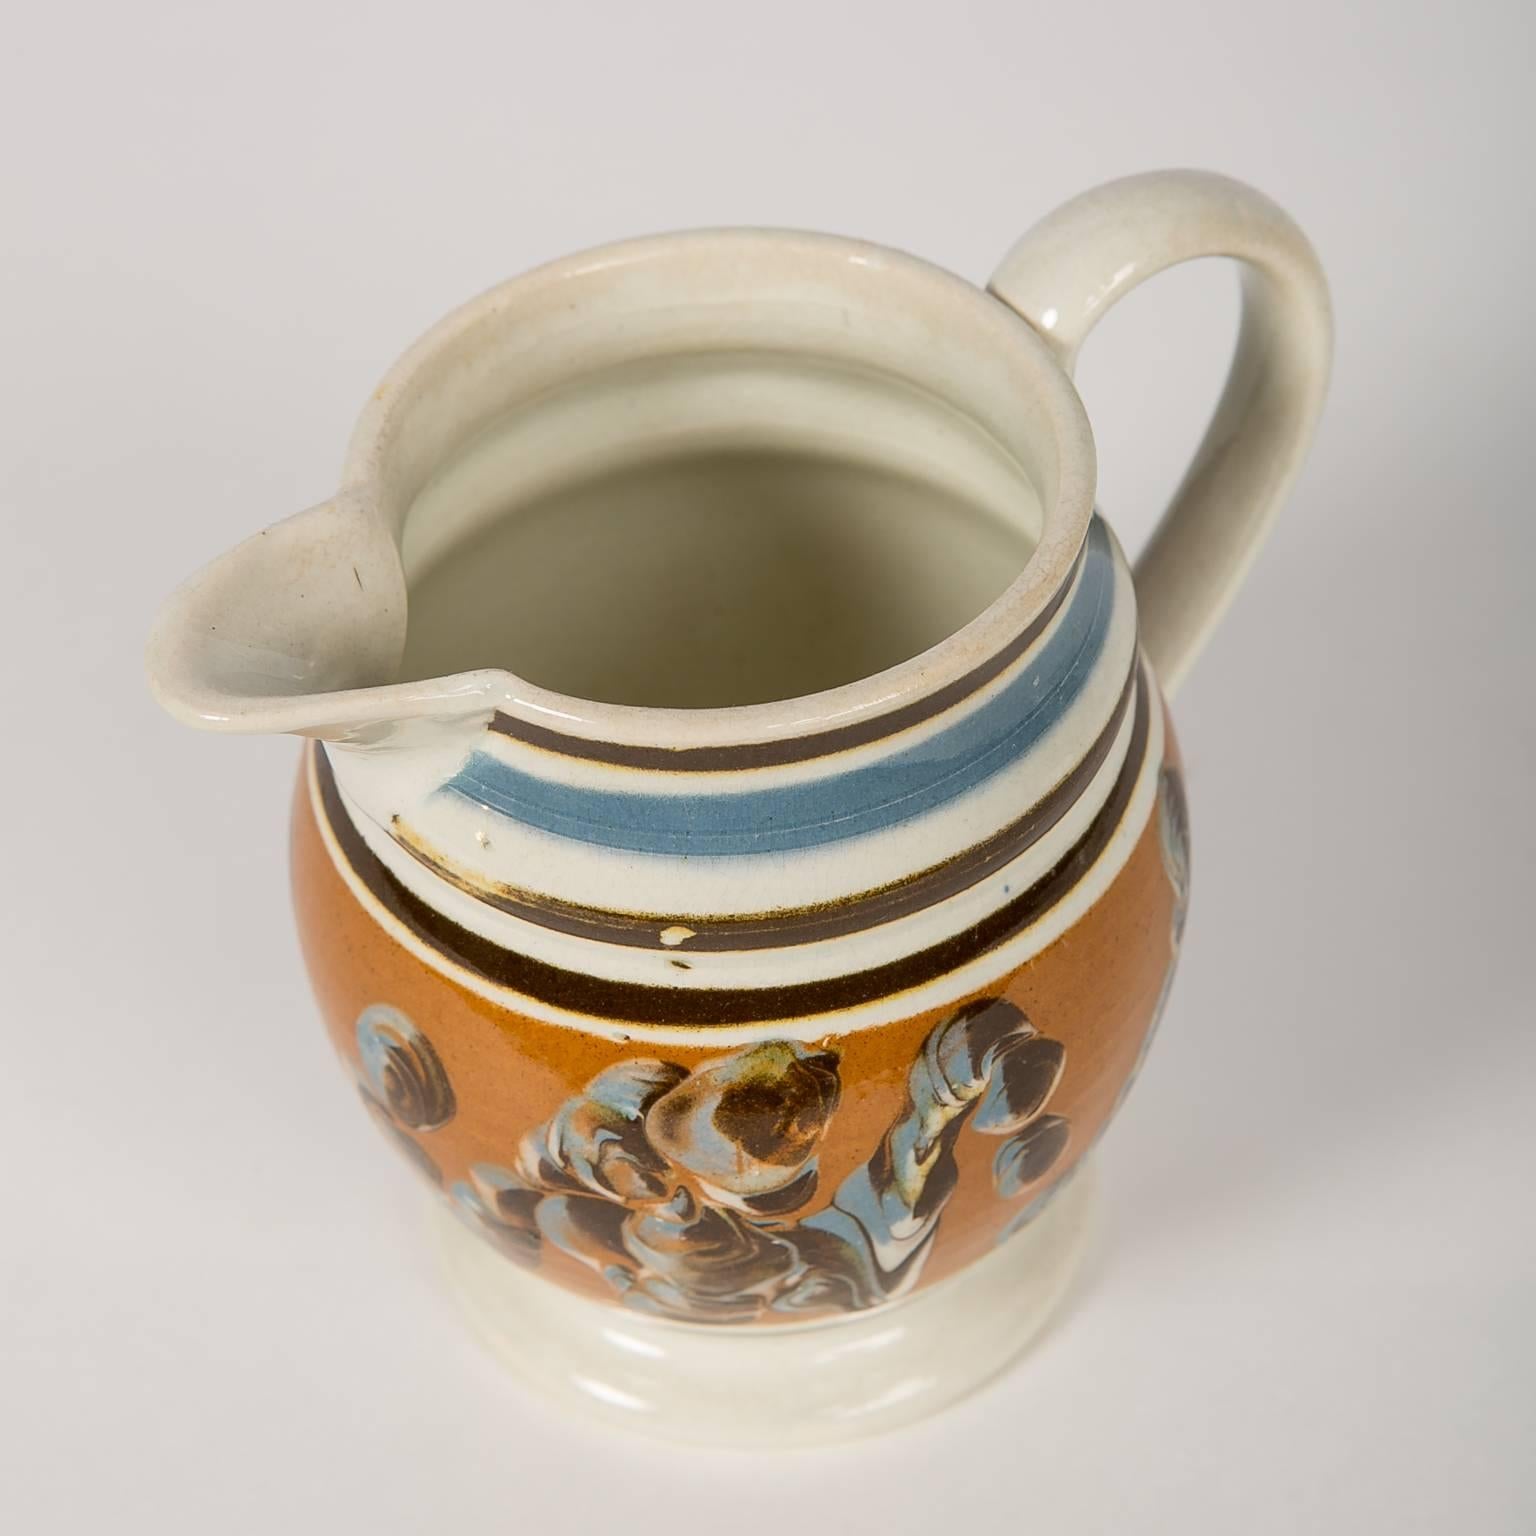 English Mocha Ware Pitcher Decorated with a Cable Pattern